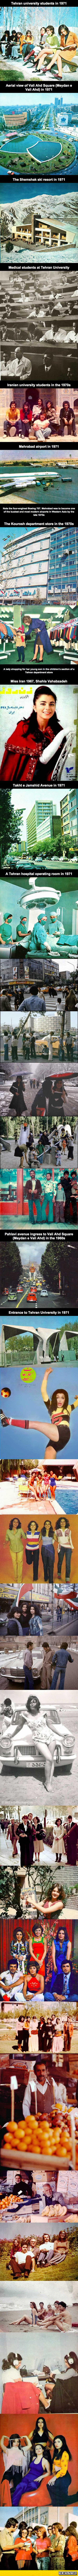 Iran In The 60s And 70s